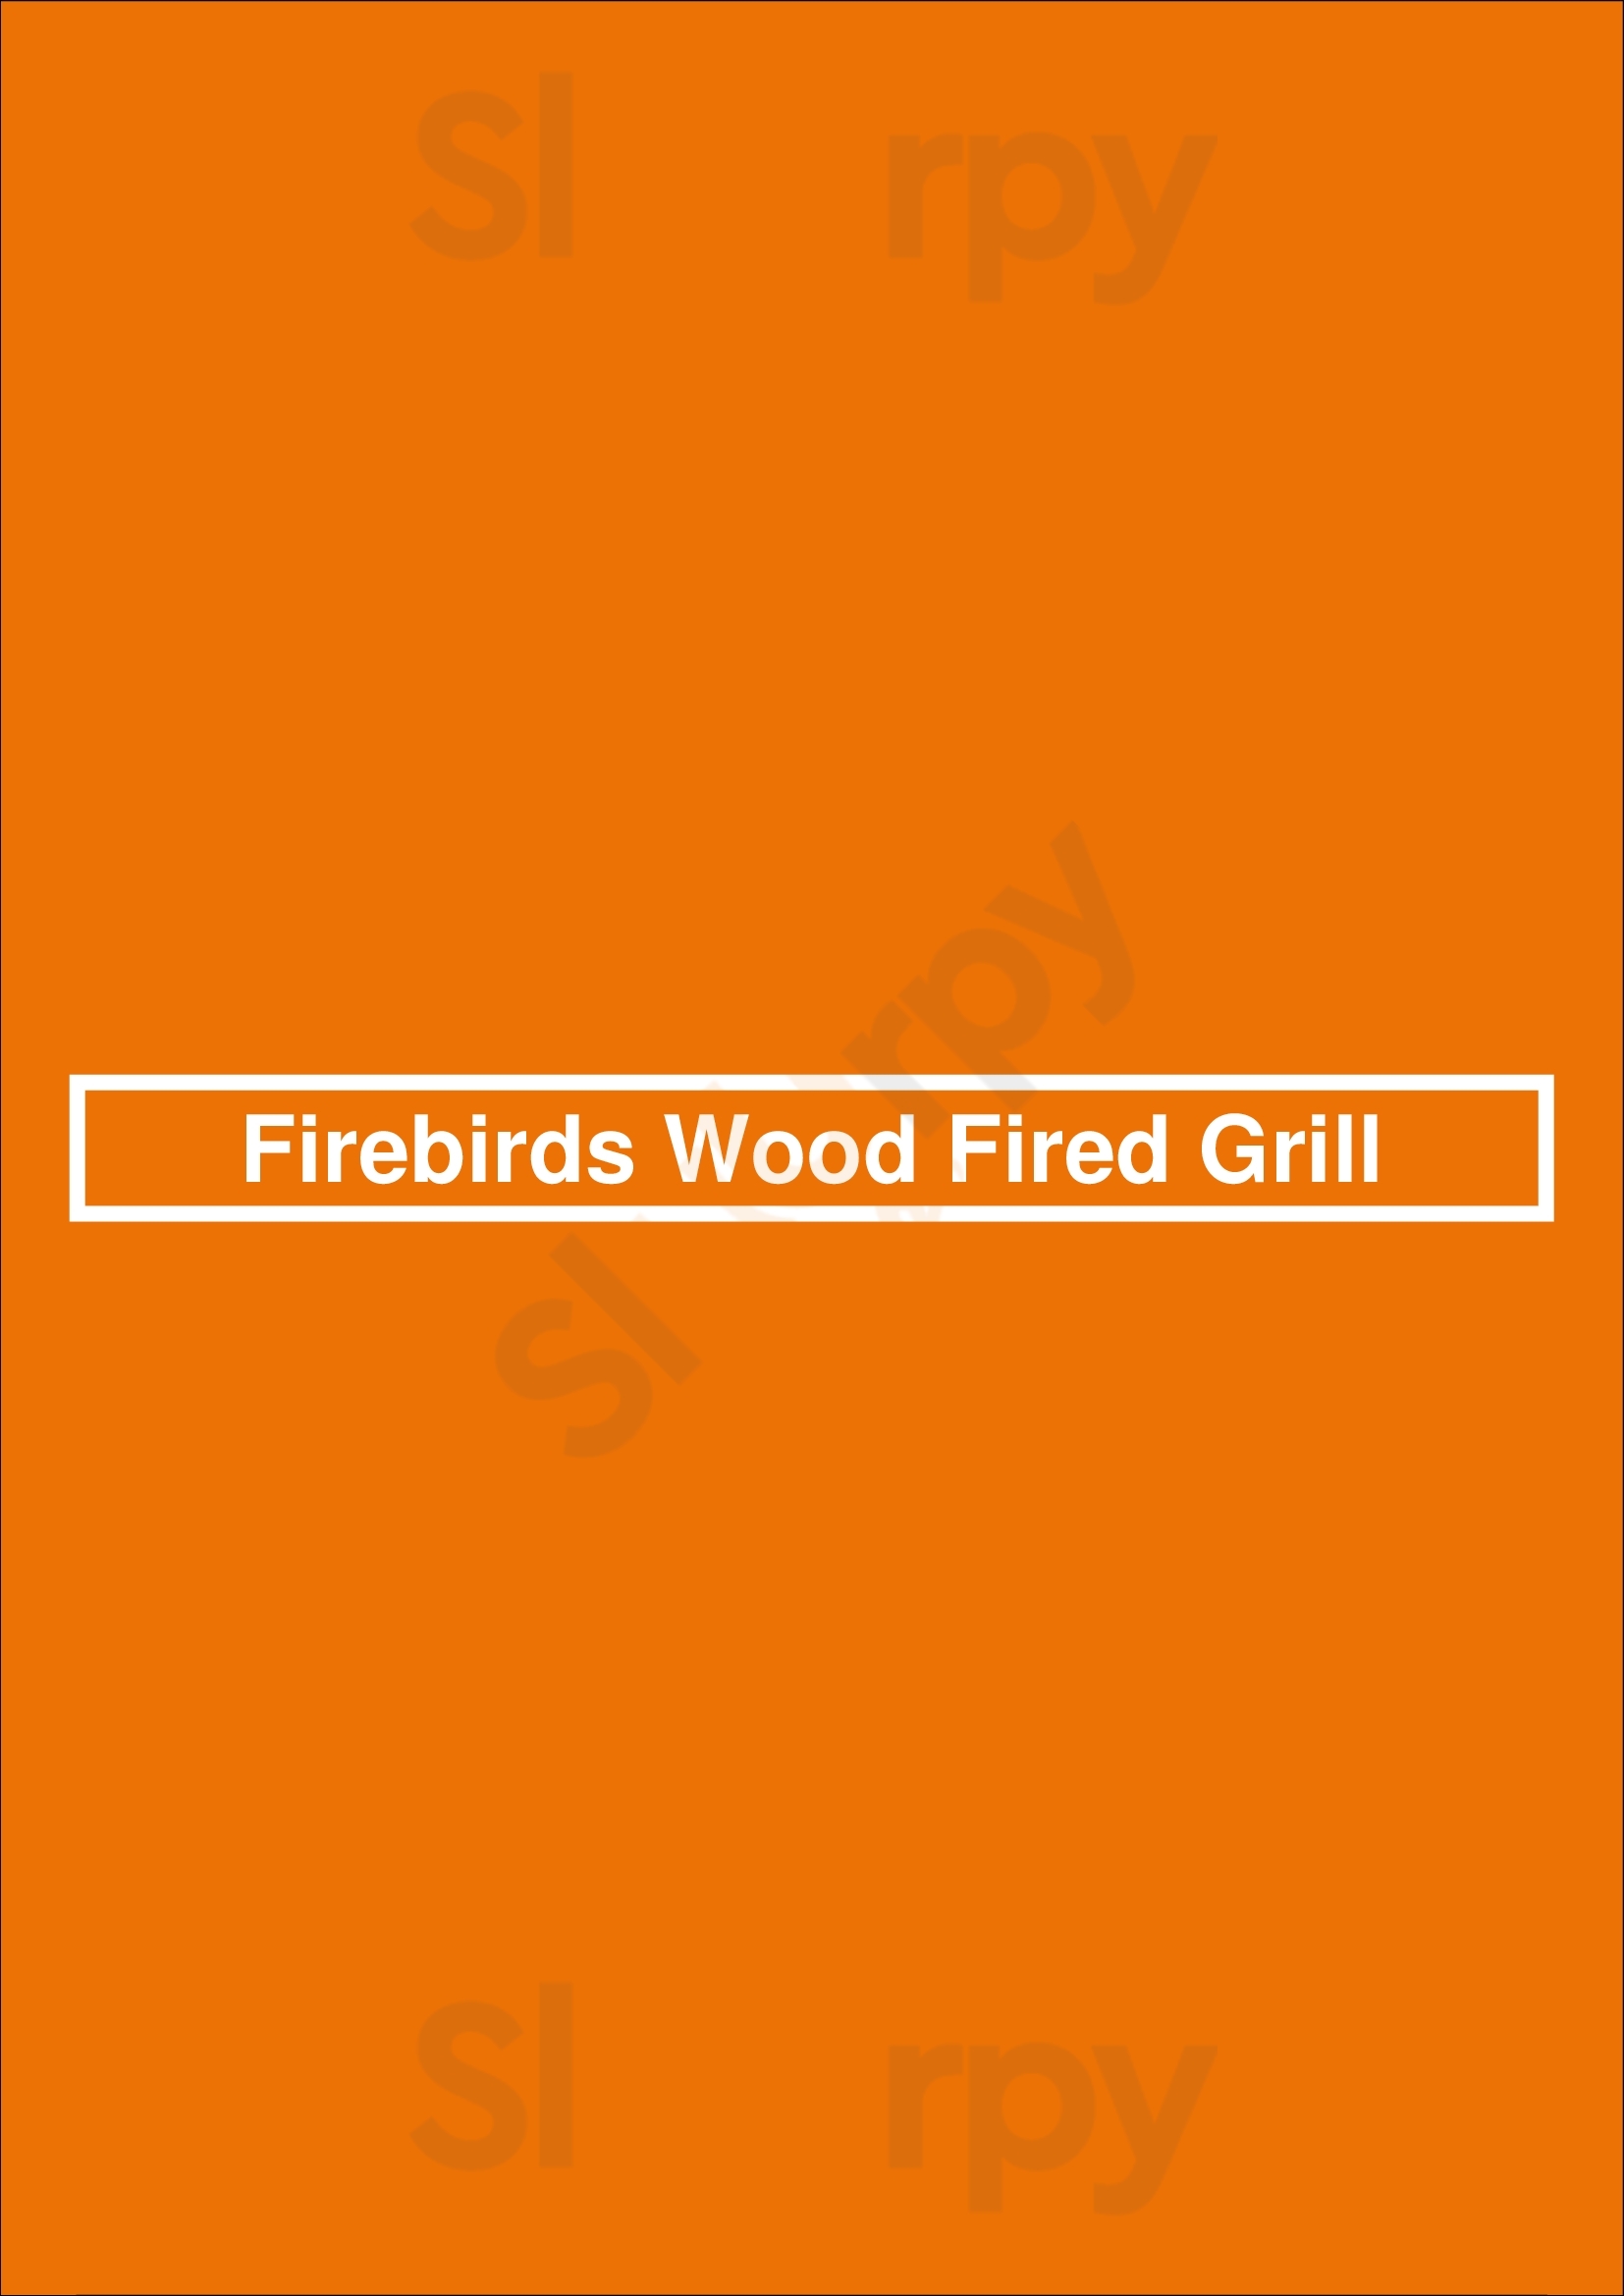 Firebirds Wood Fired Grill Indianapolis Menu - 1